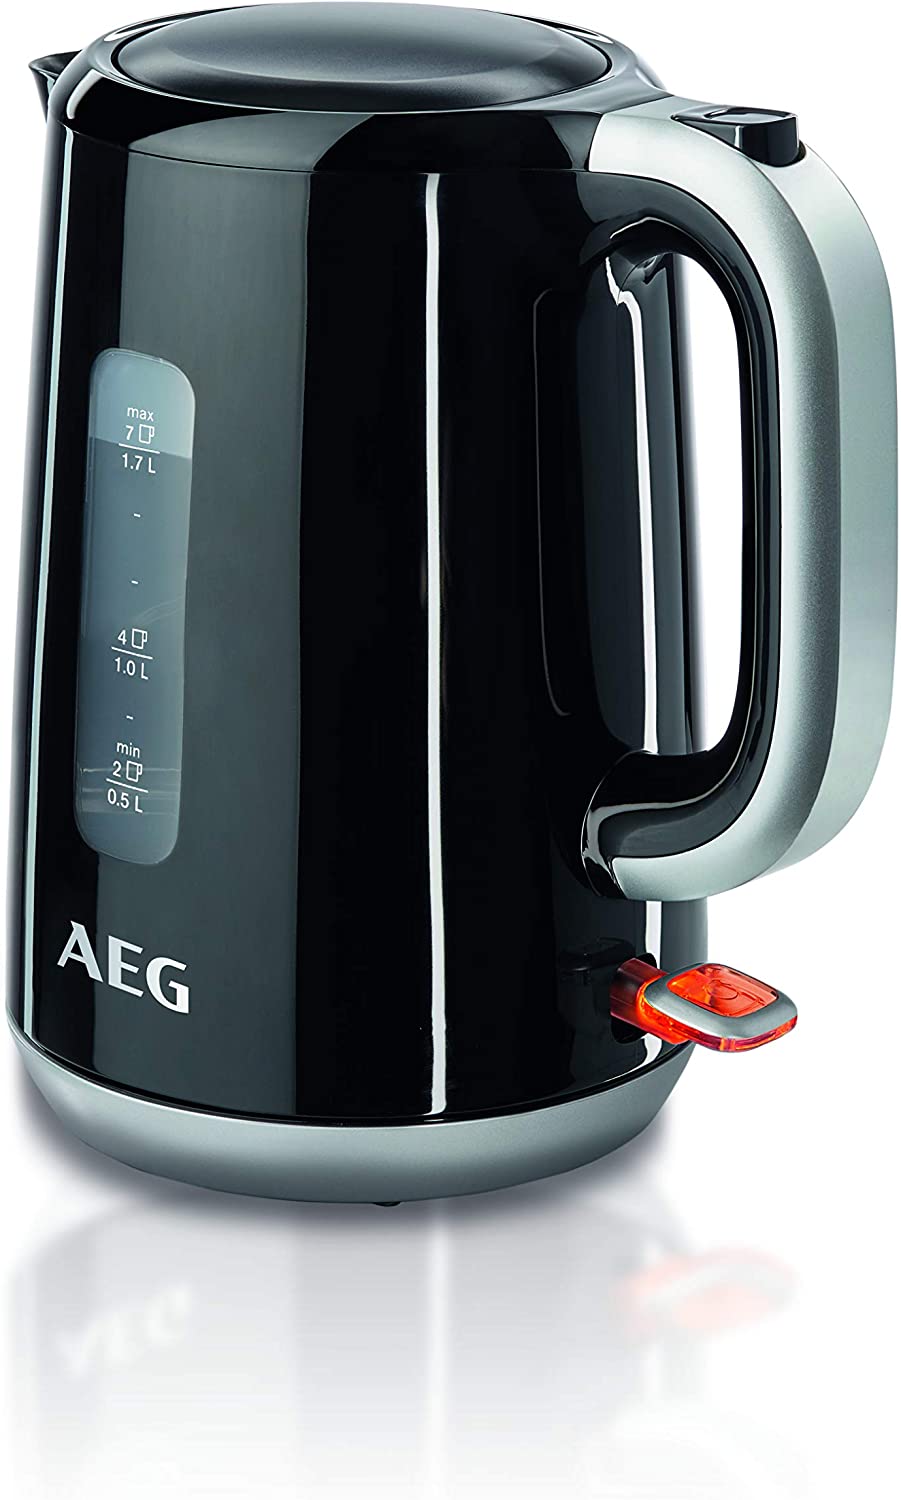 AEG EWA 3700 Express Kettle (Super Fast Boiling, 3000 Watt, 1.7 L, Removable Limescale Filter, Water Level Indicator with Litre/Cup Indicator, Safety Shut-Off, On/Off Switch, Black)